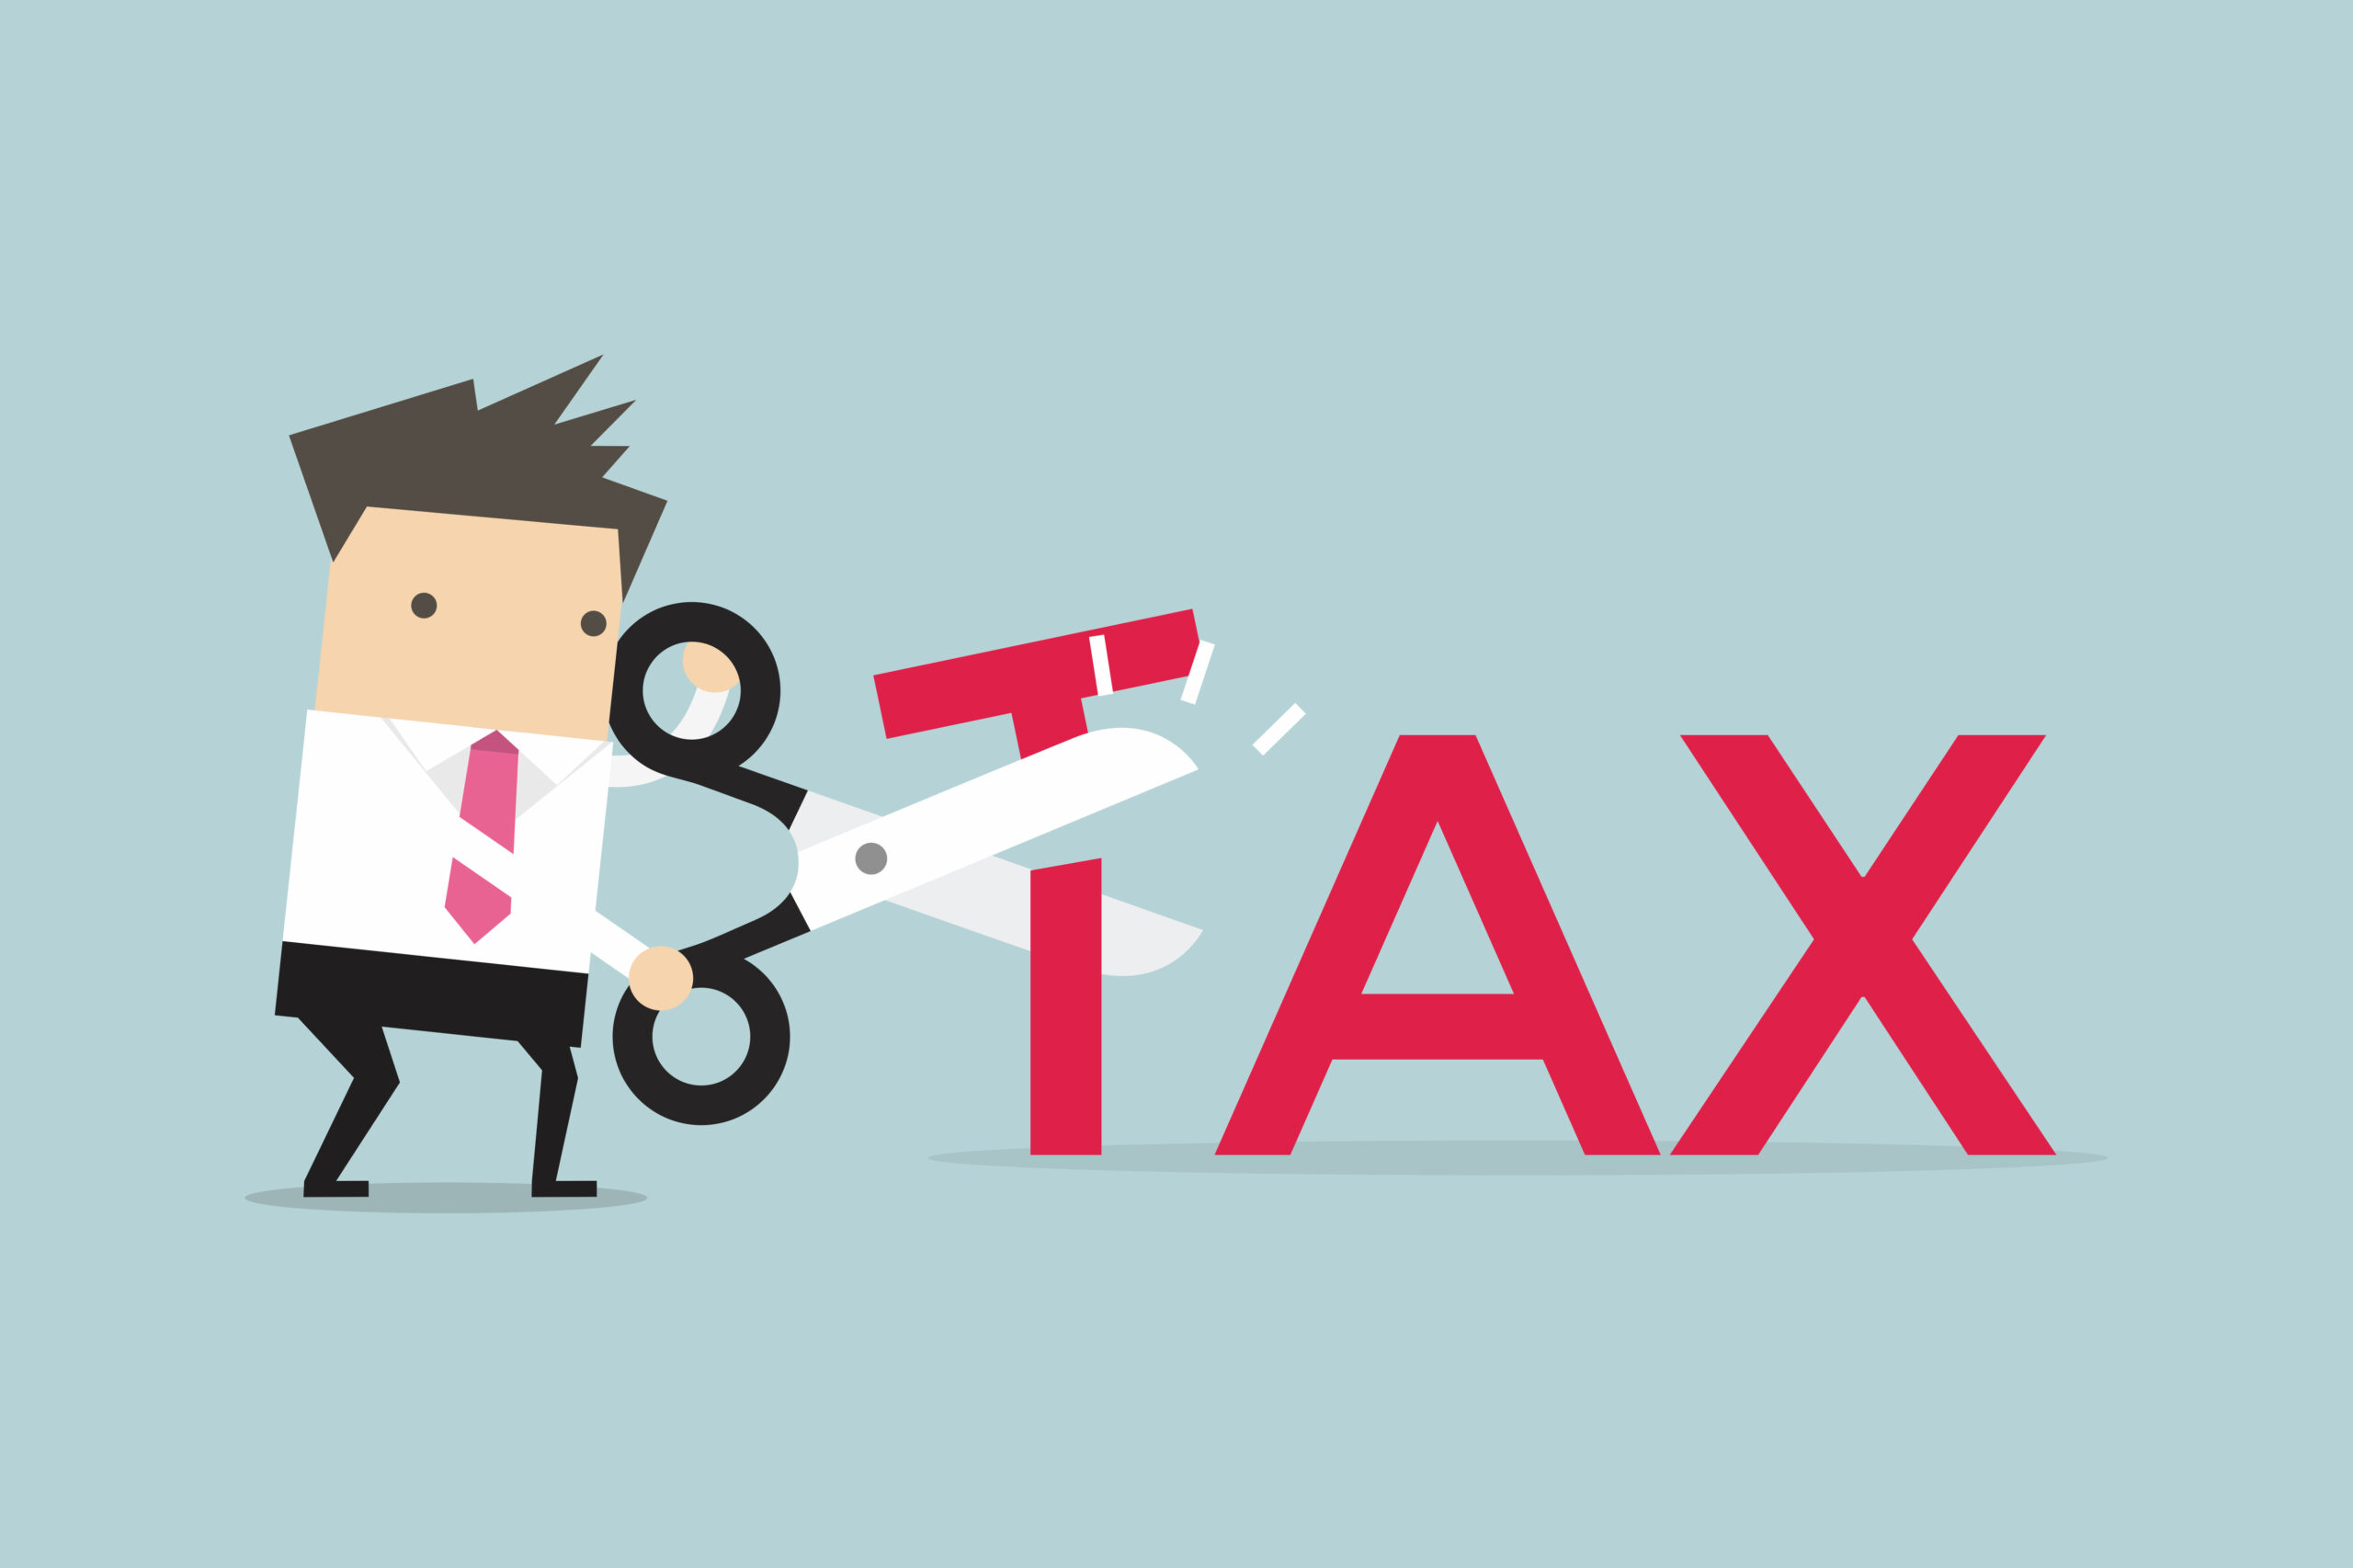 Cartoon businessman cutting the word “tax” in half, signifying that you can save for retirement in a tax-advantaged account such as a Self-Directed IRA or 401(k).